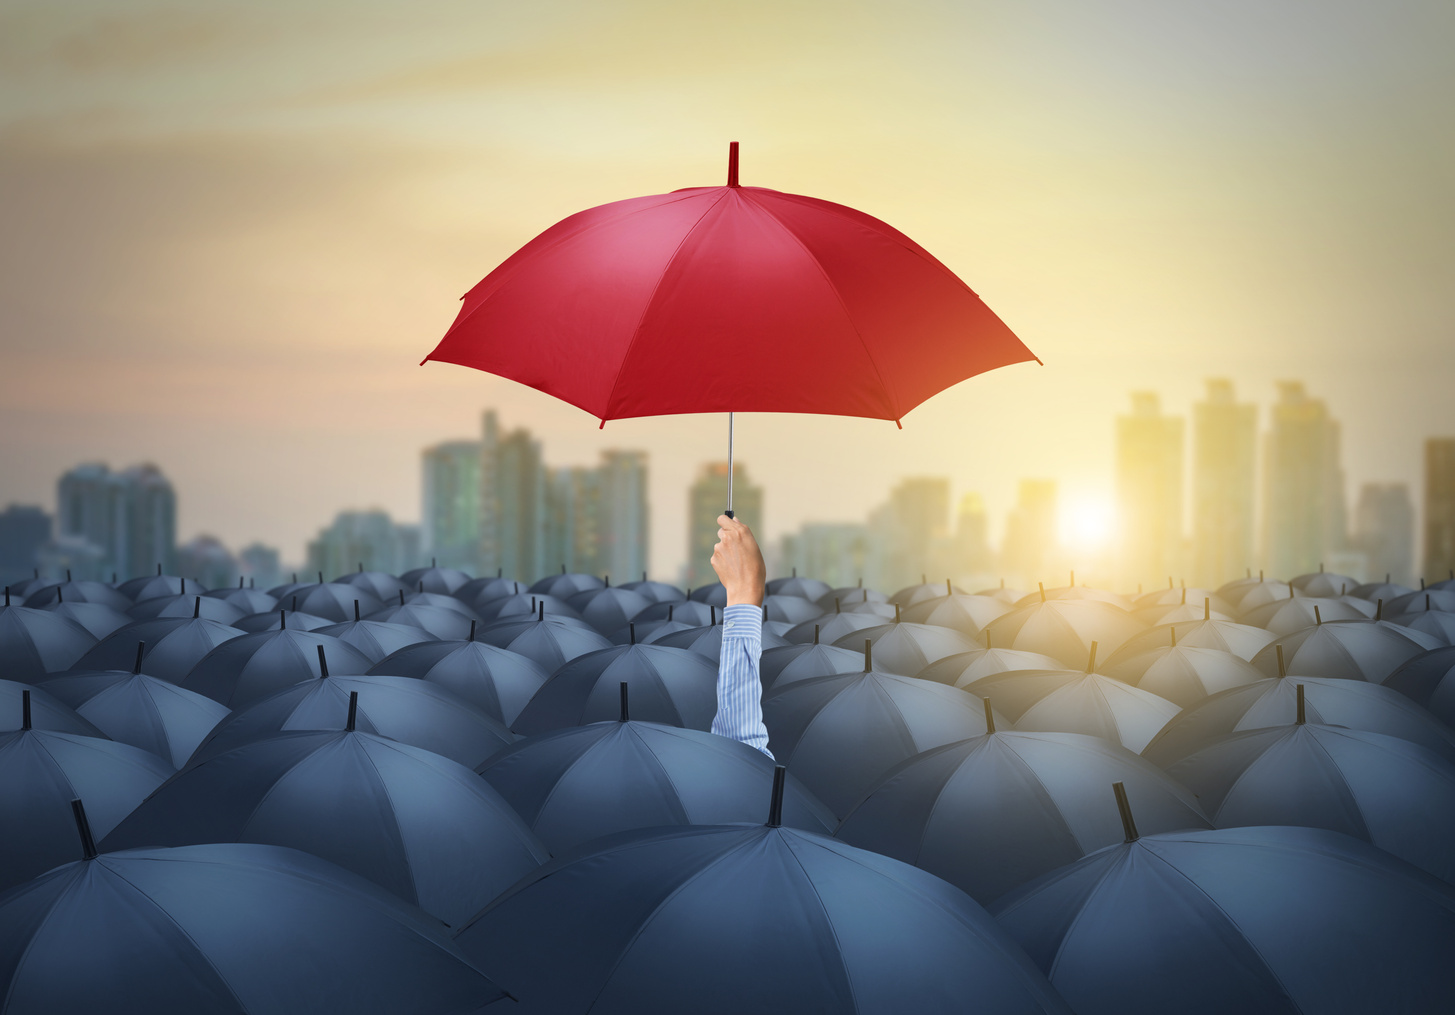 businessman with red umbrella among others, unique different concept